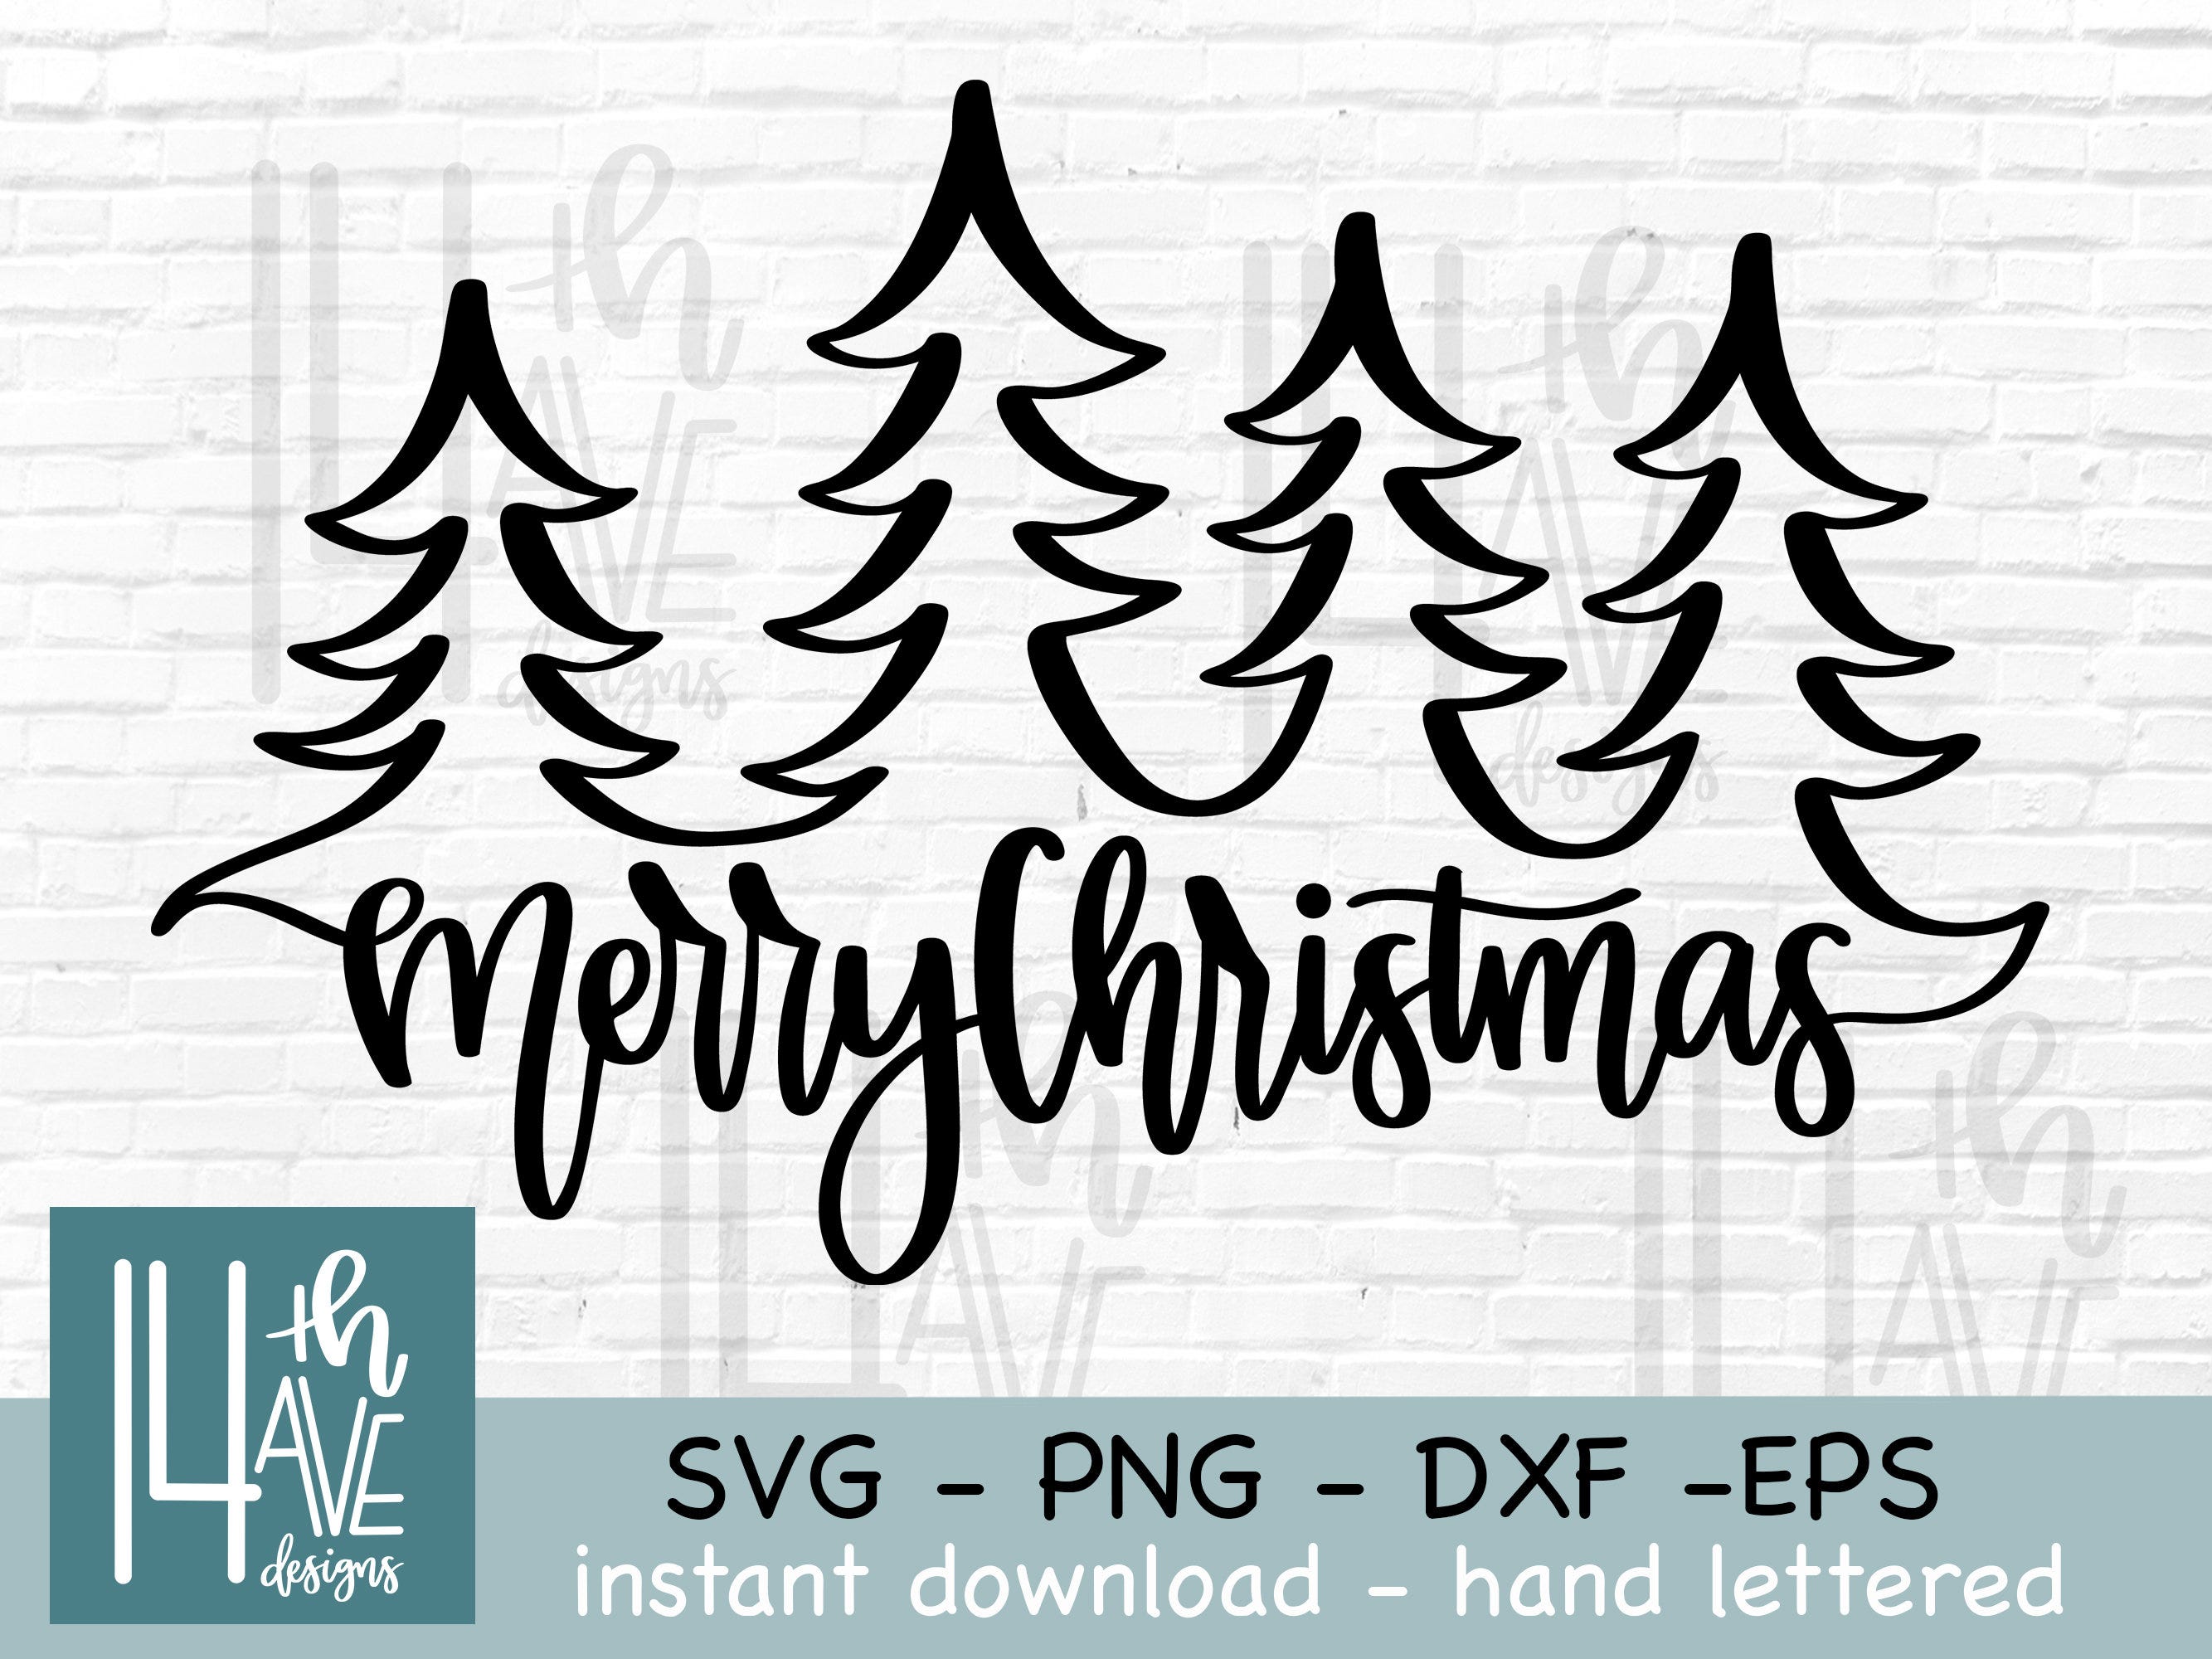 Merry Christmas SVG, Christmas Tree Cut File, Hand Lettered, Christmas Text Overlay, svg, png, dxf, clip art, eps